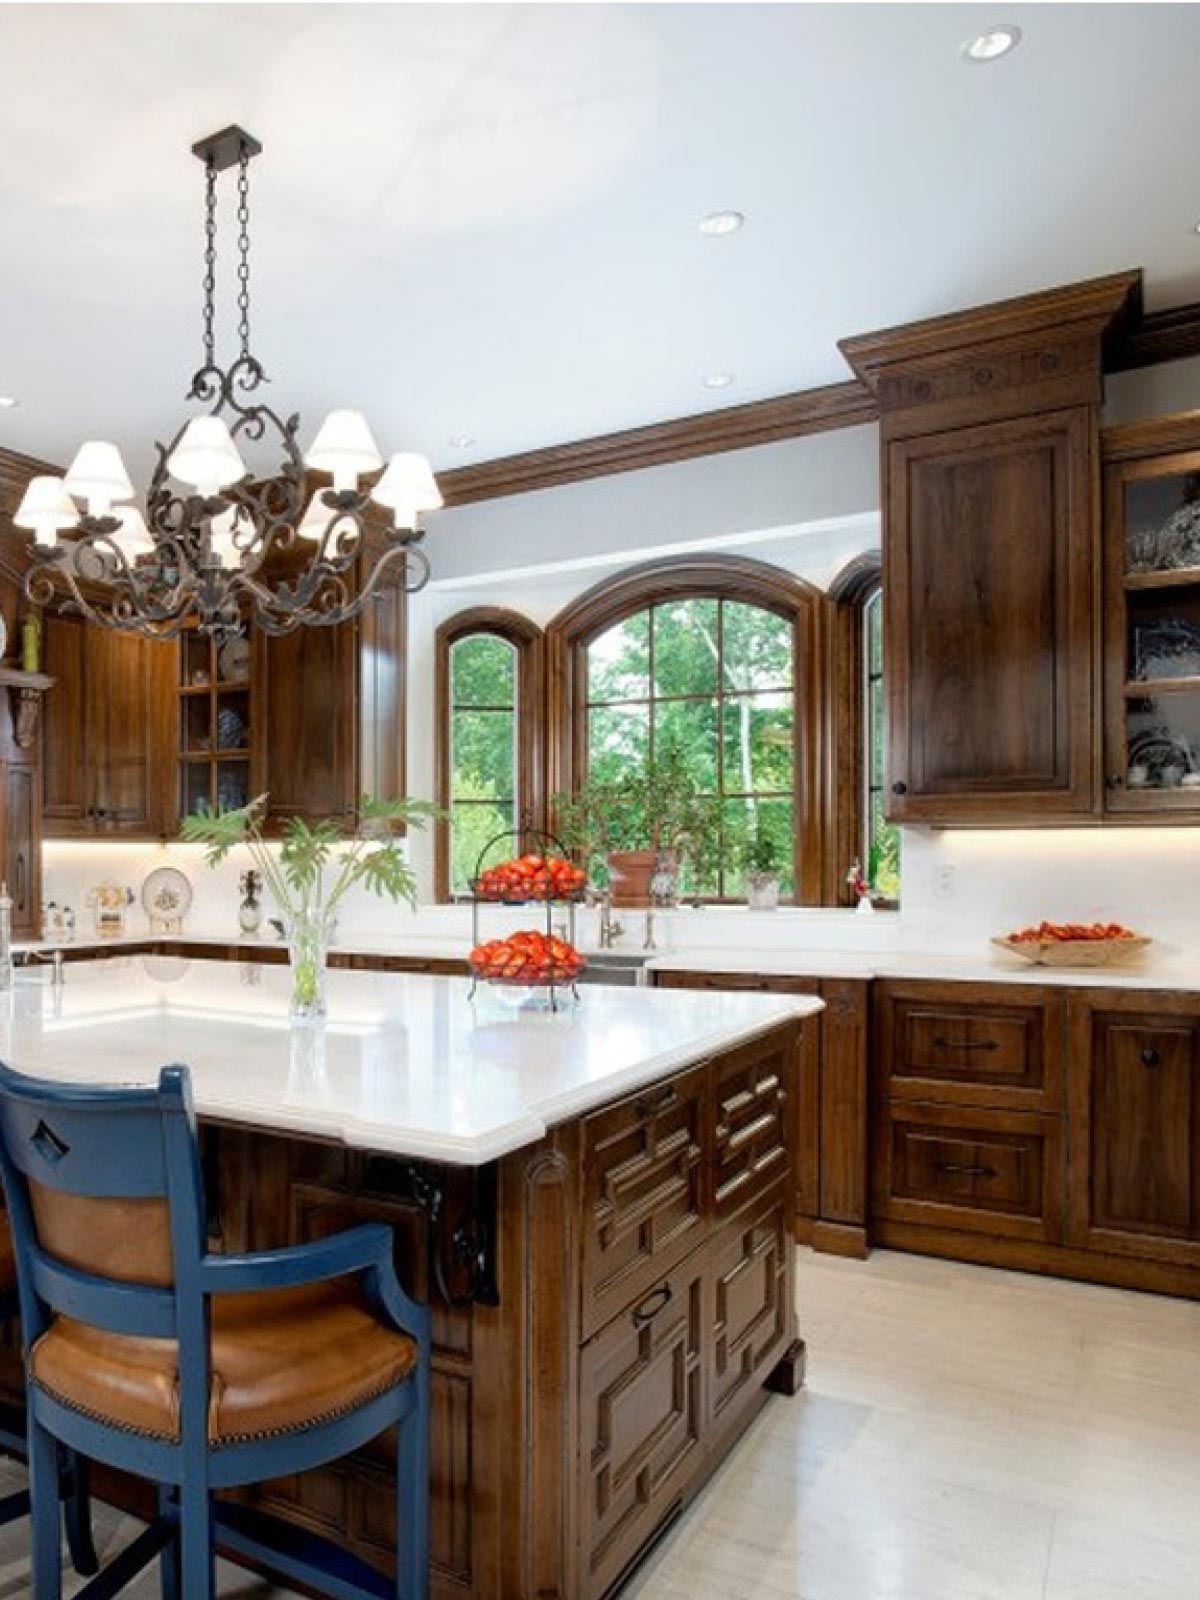 GREENWICH, Usa – Custom kitchen in private house